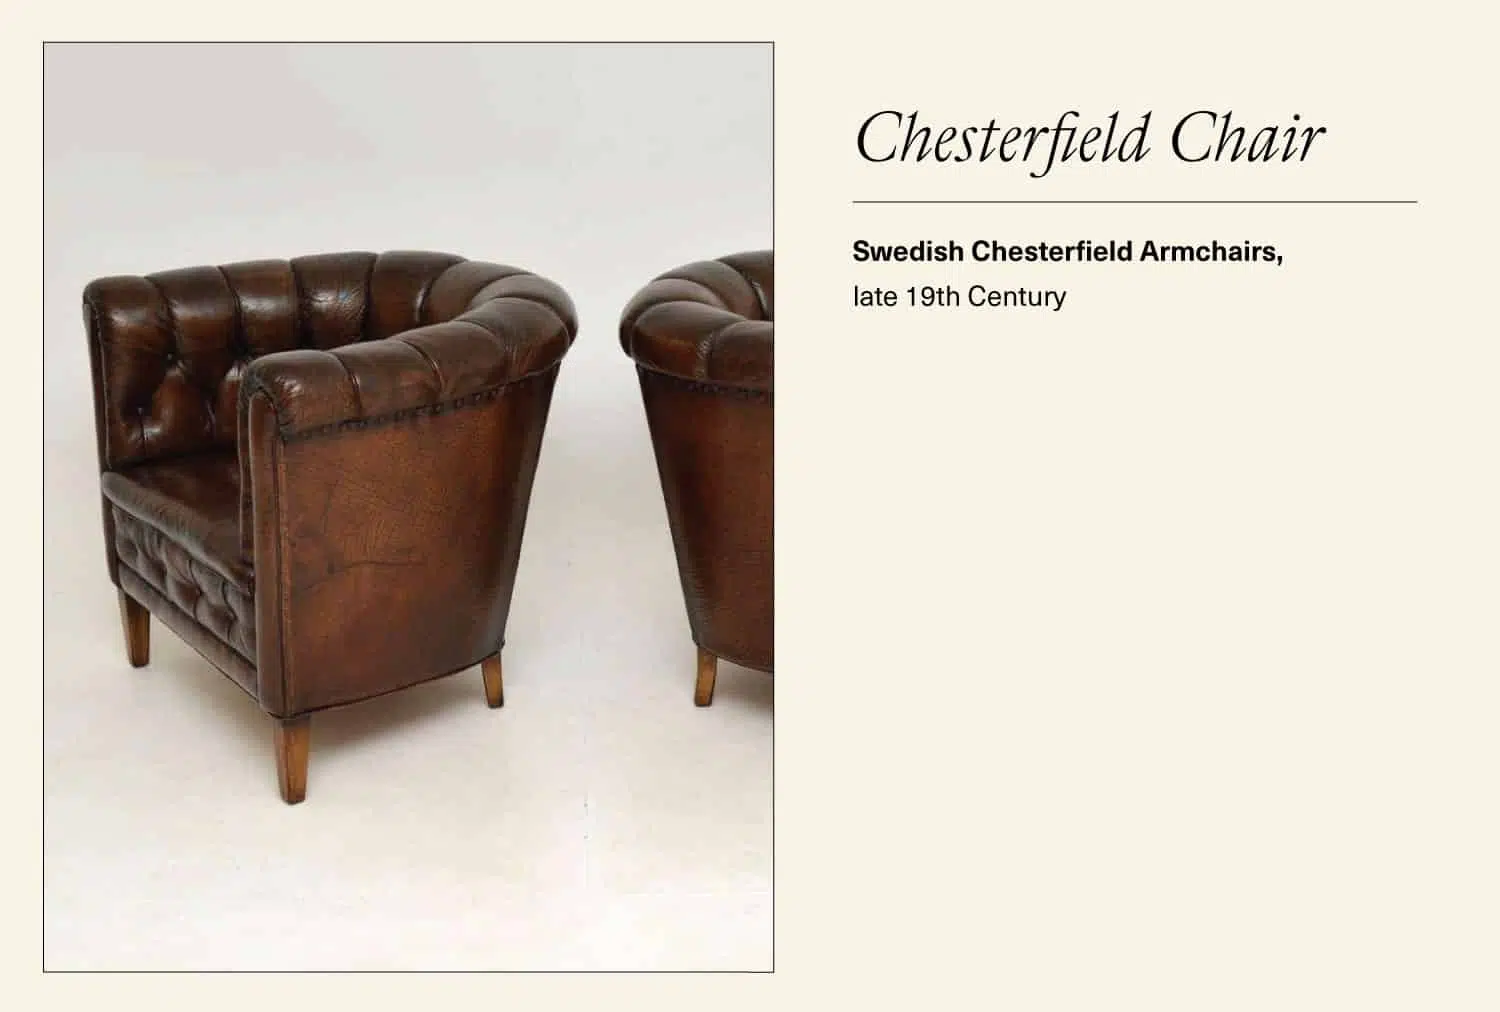 Pair of leather Swedish Chesterfield armchairs